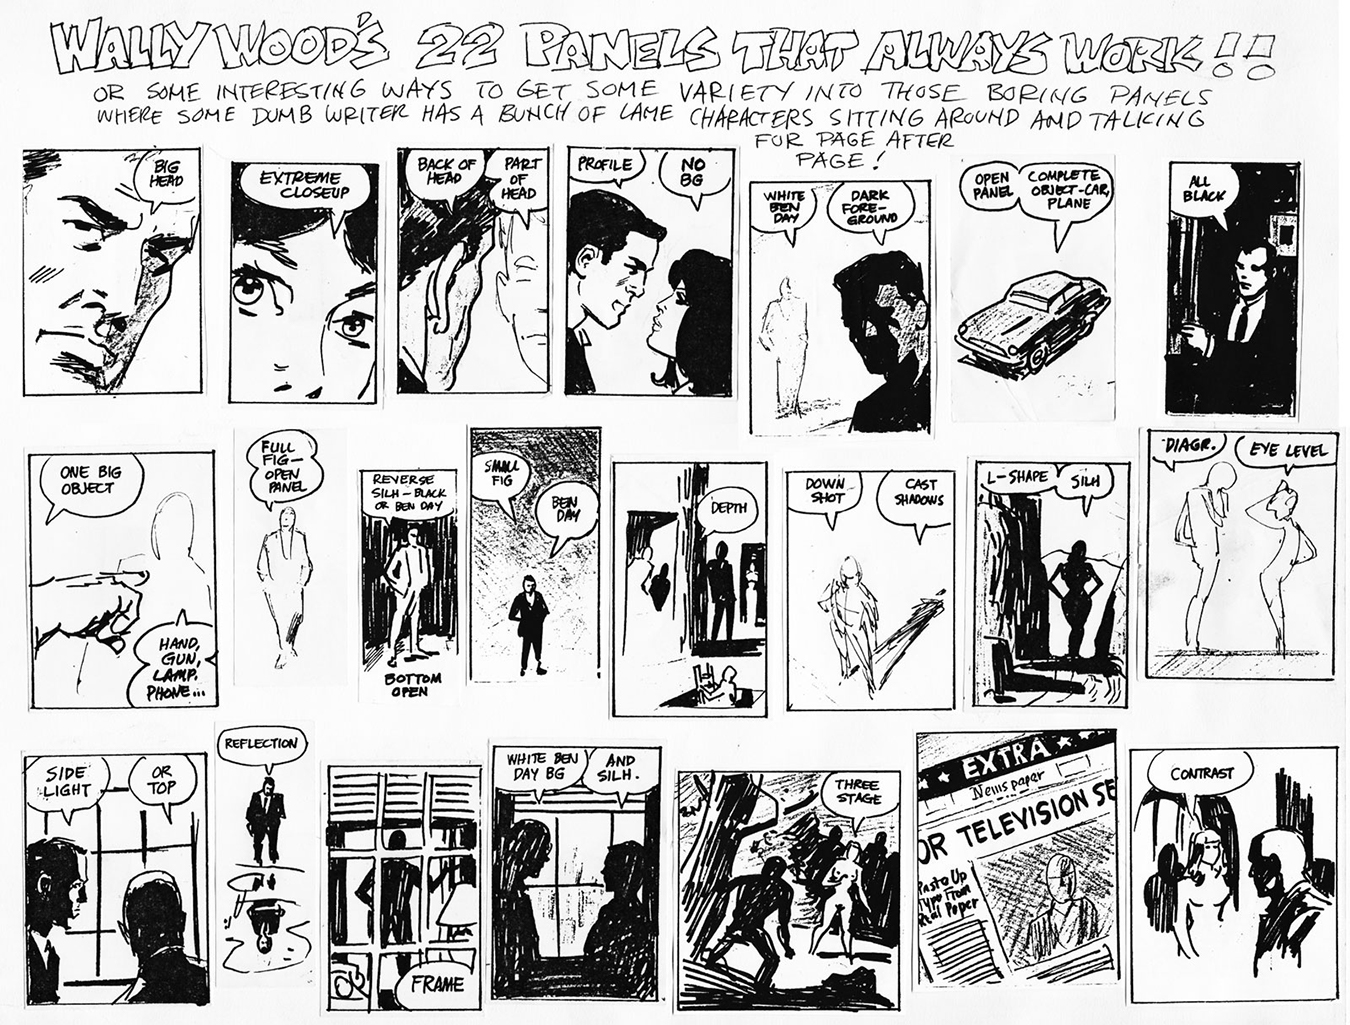 Wally Wood’s 22 Panels That Always Work